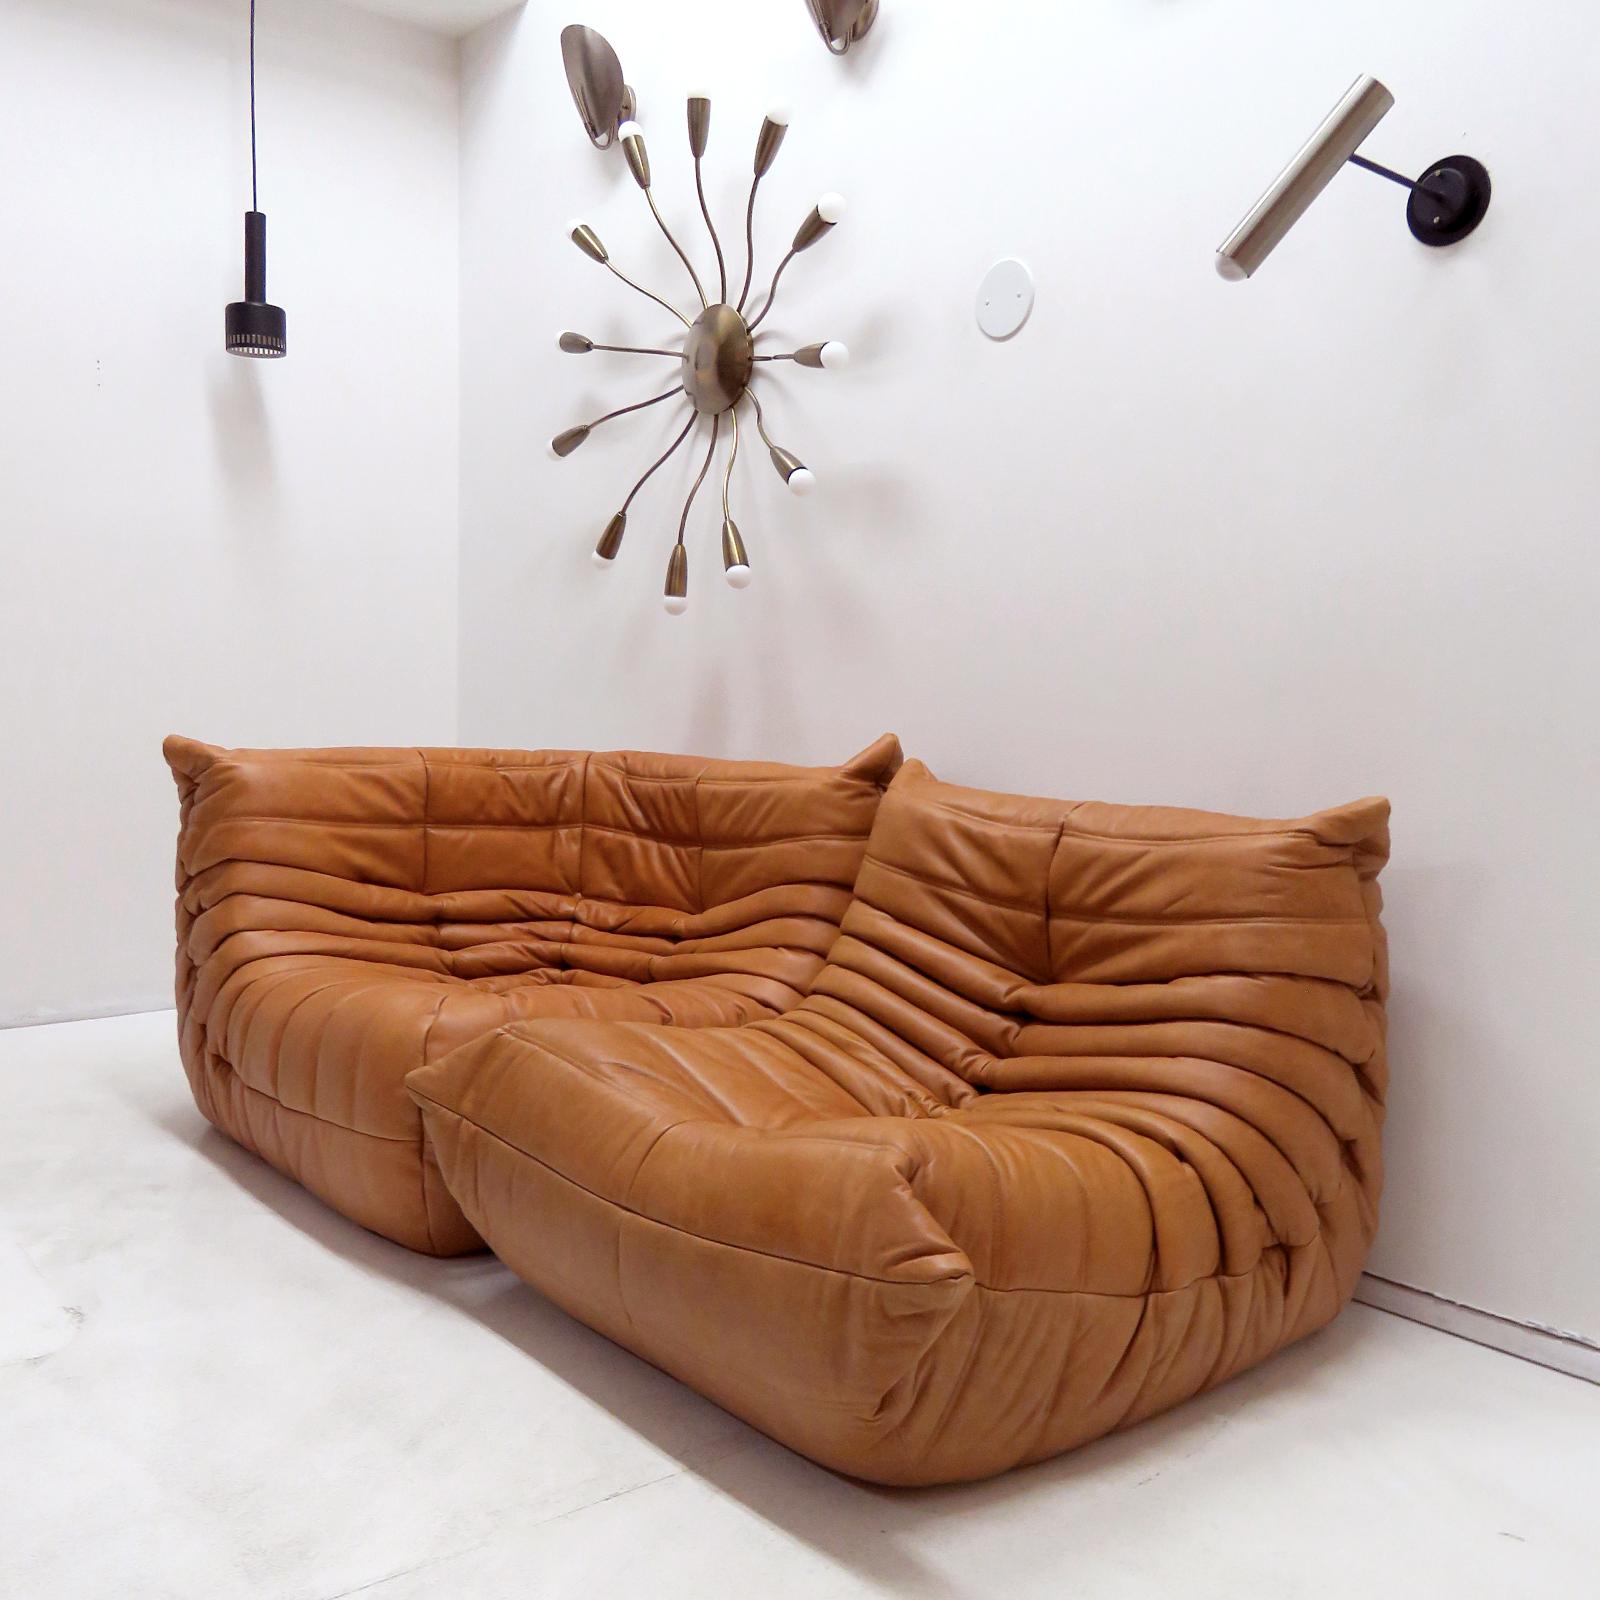 Late 20th Century Corner Chair 'Togo' by Michel Ducaroy for Ligne Roset